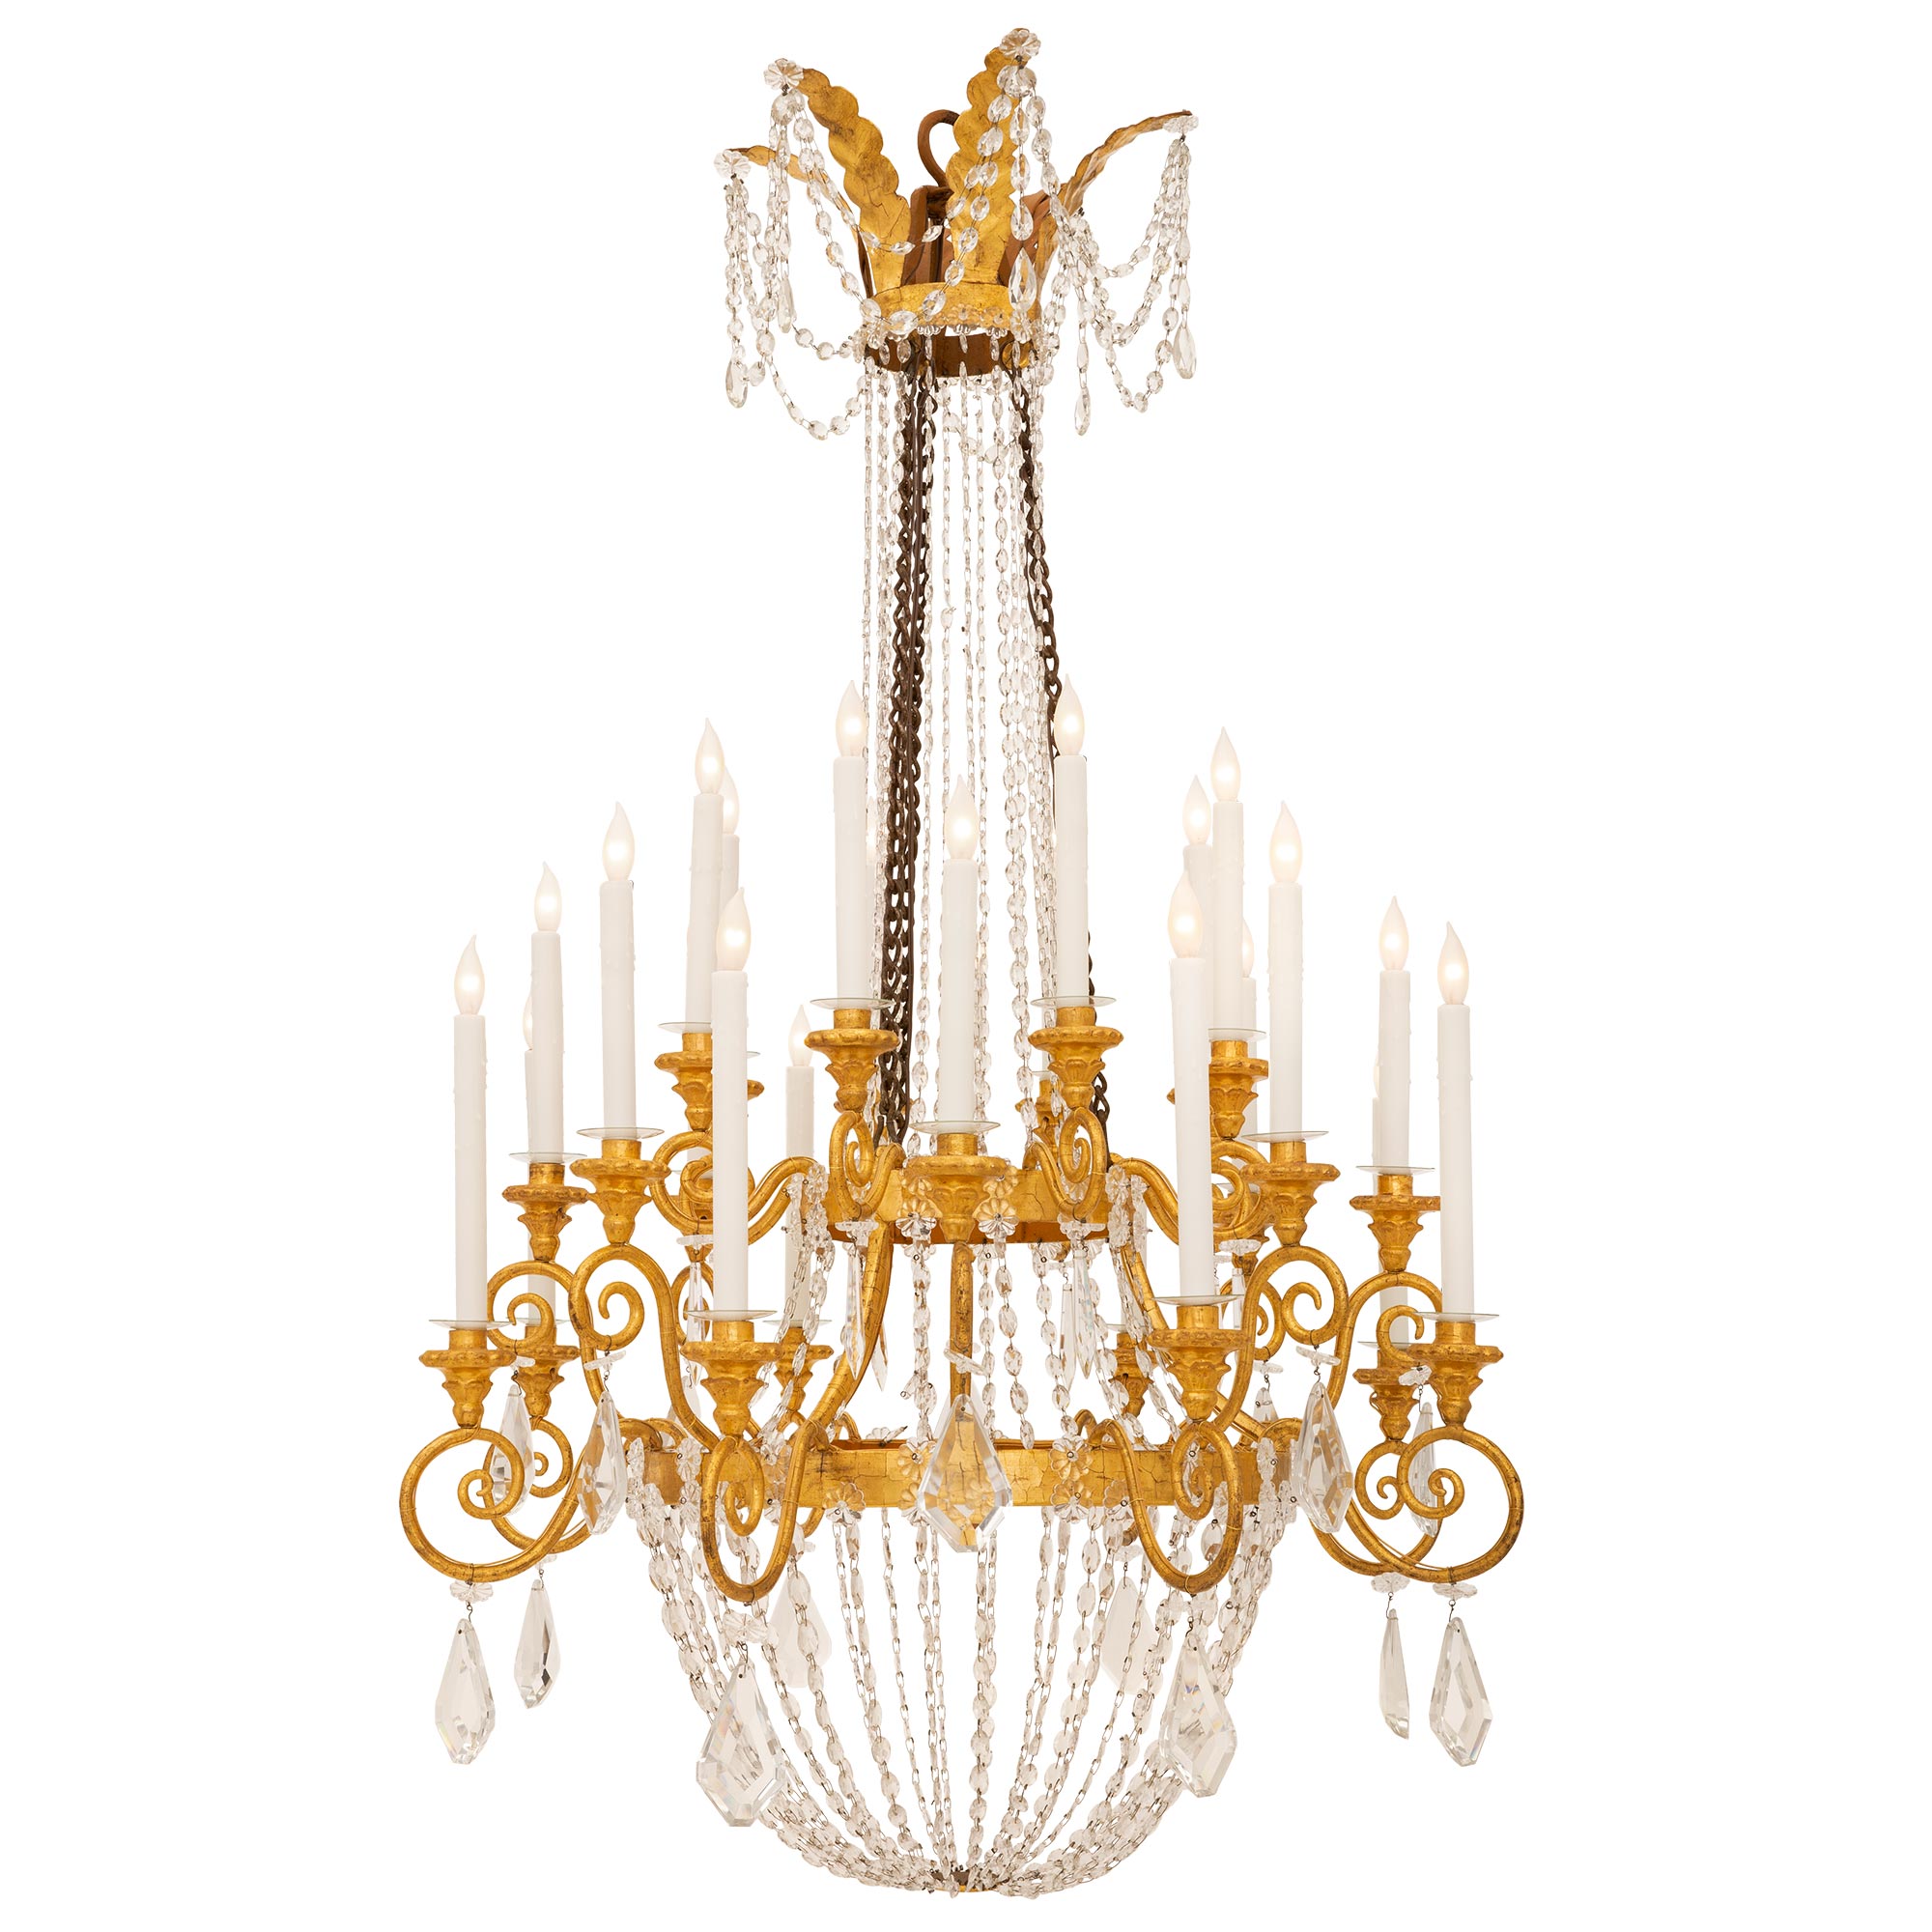 Italian 19th Century Neo-Classical St. Crystal, Giltwood & Iron Chandelier 